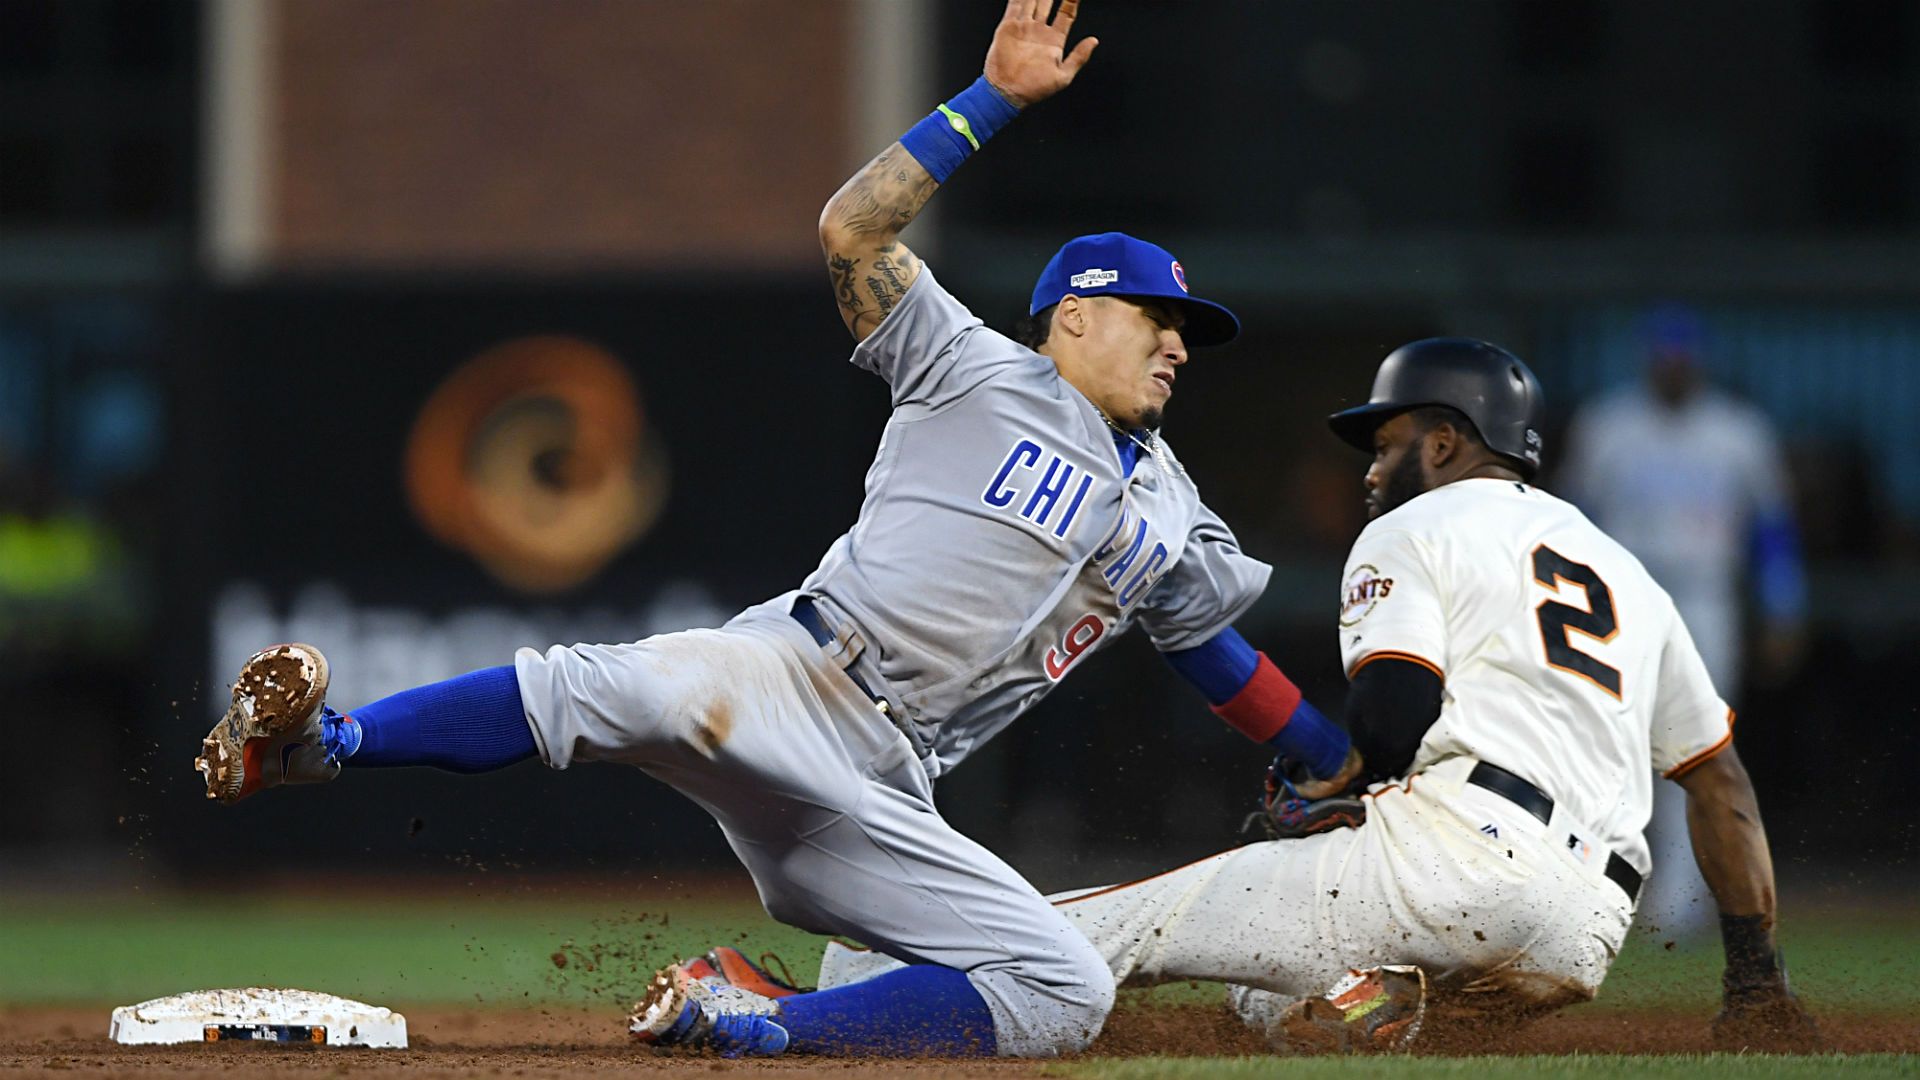 Cubs Giants NLDS: Javier Baez Shows Off How Ridiculous He Is